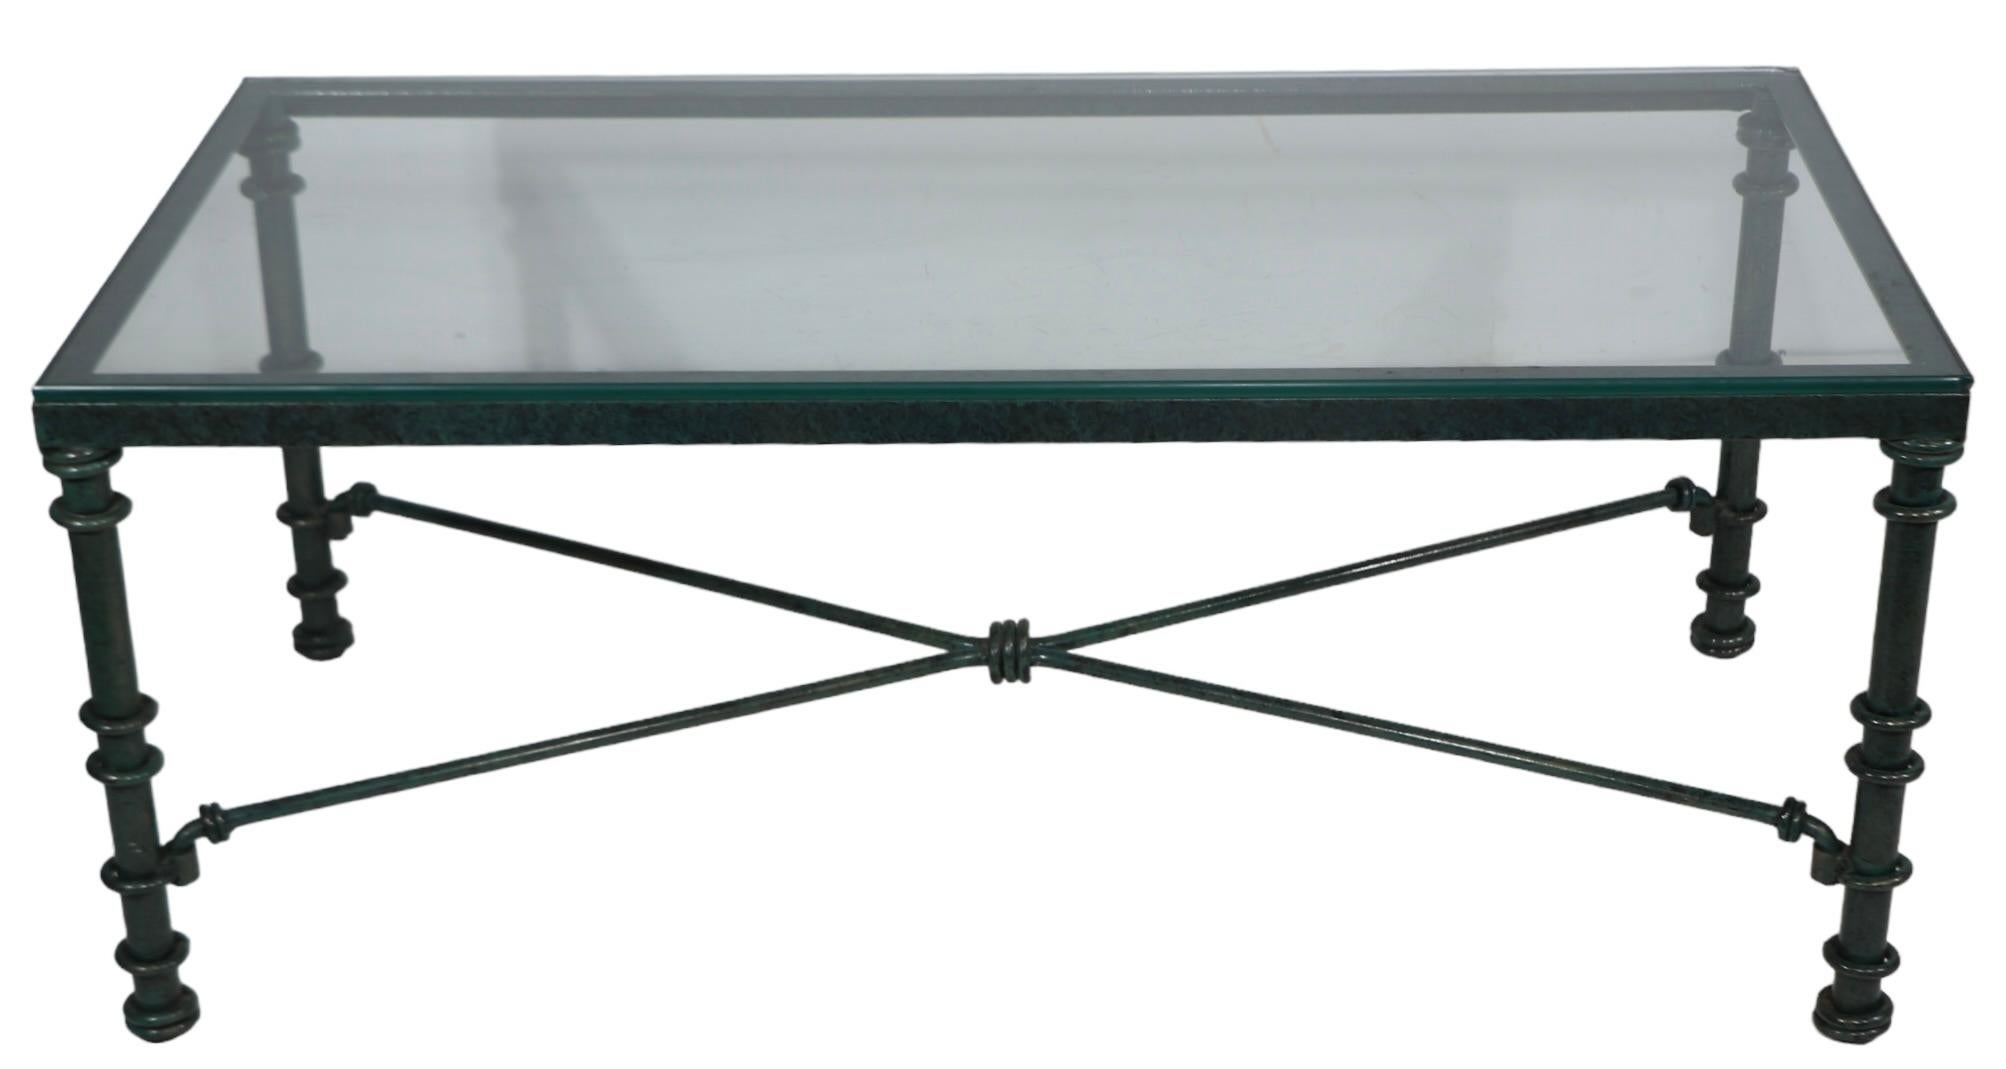 Voguish Brutalist coffee table in rich faux Verdigris paint finish, made in the USA c 1970-1980's. The table features a metal base in  original dark green and black finish, with a glass top. The paint finish is in excellent clean, ready to use